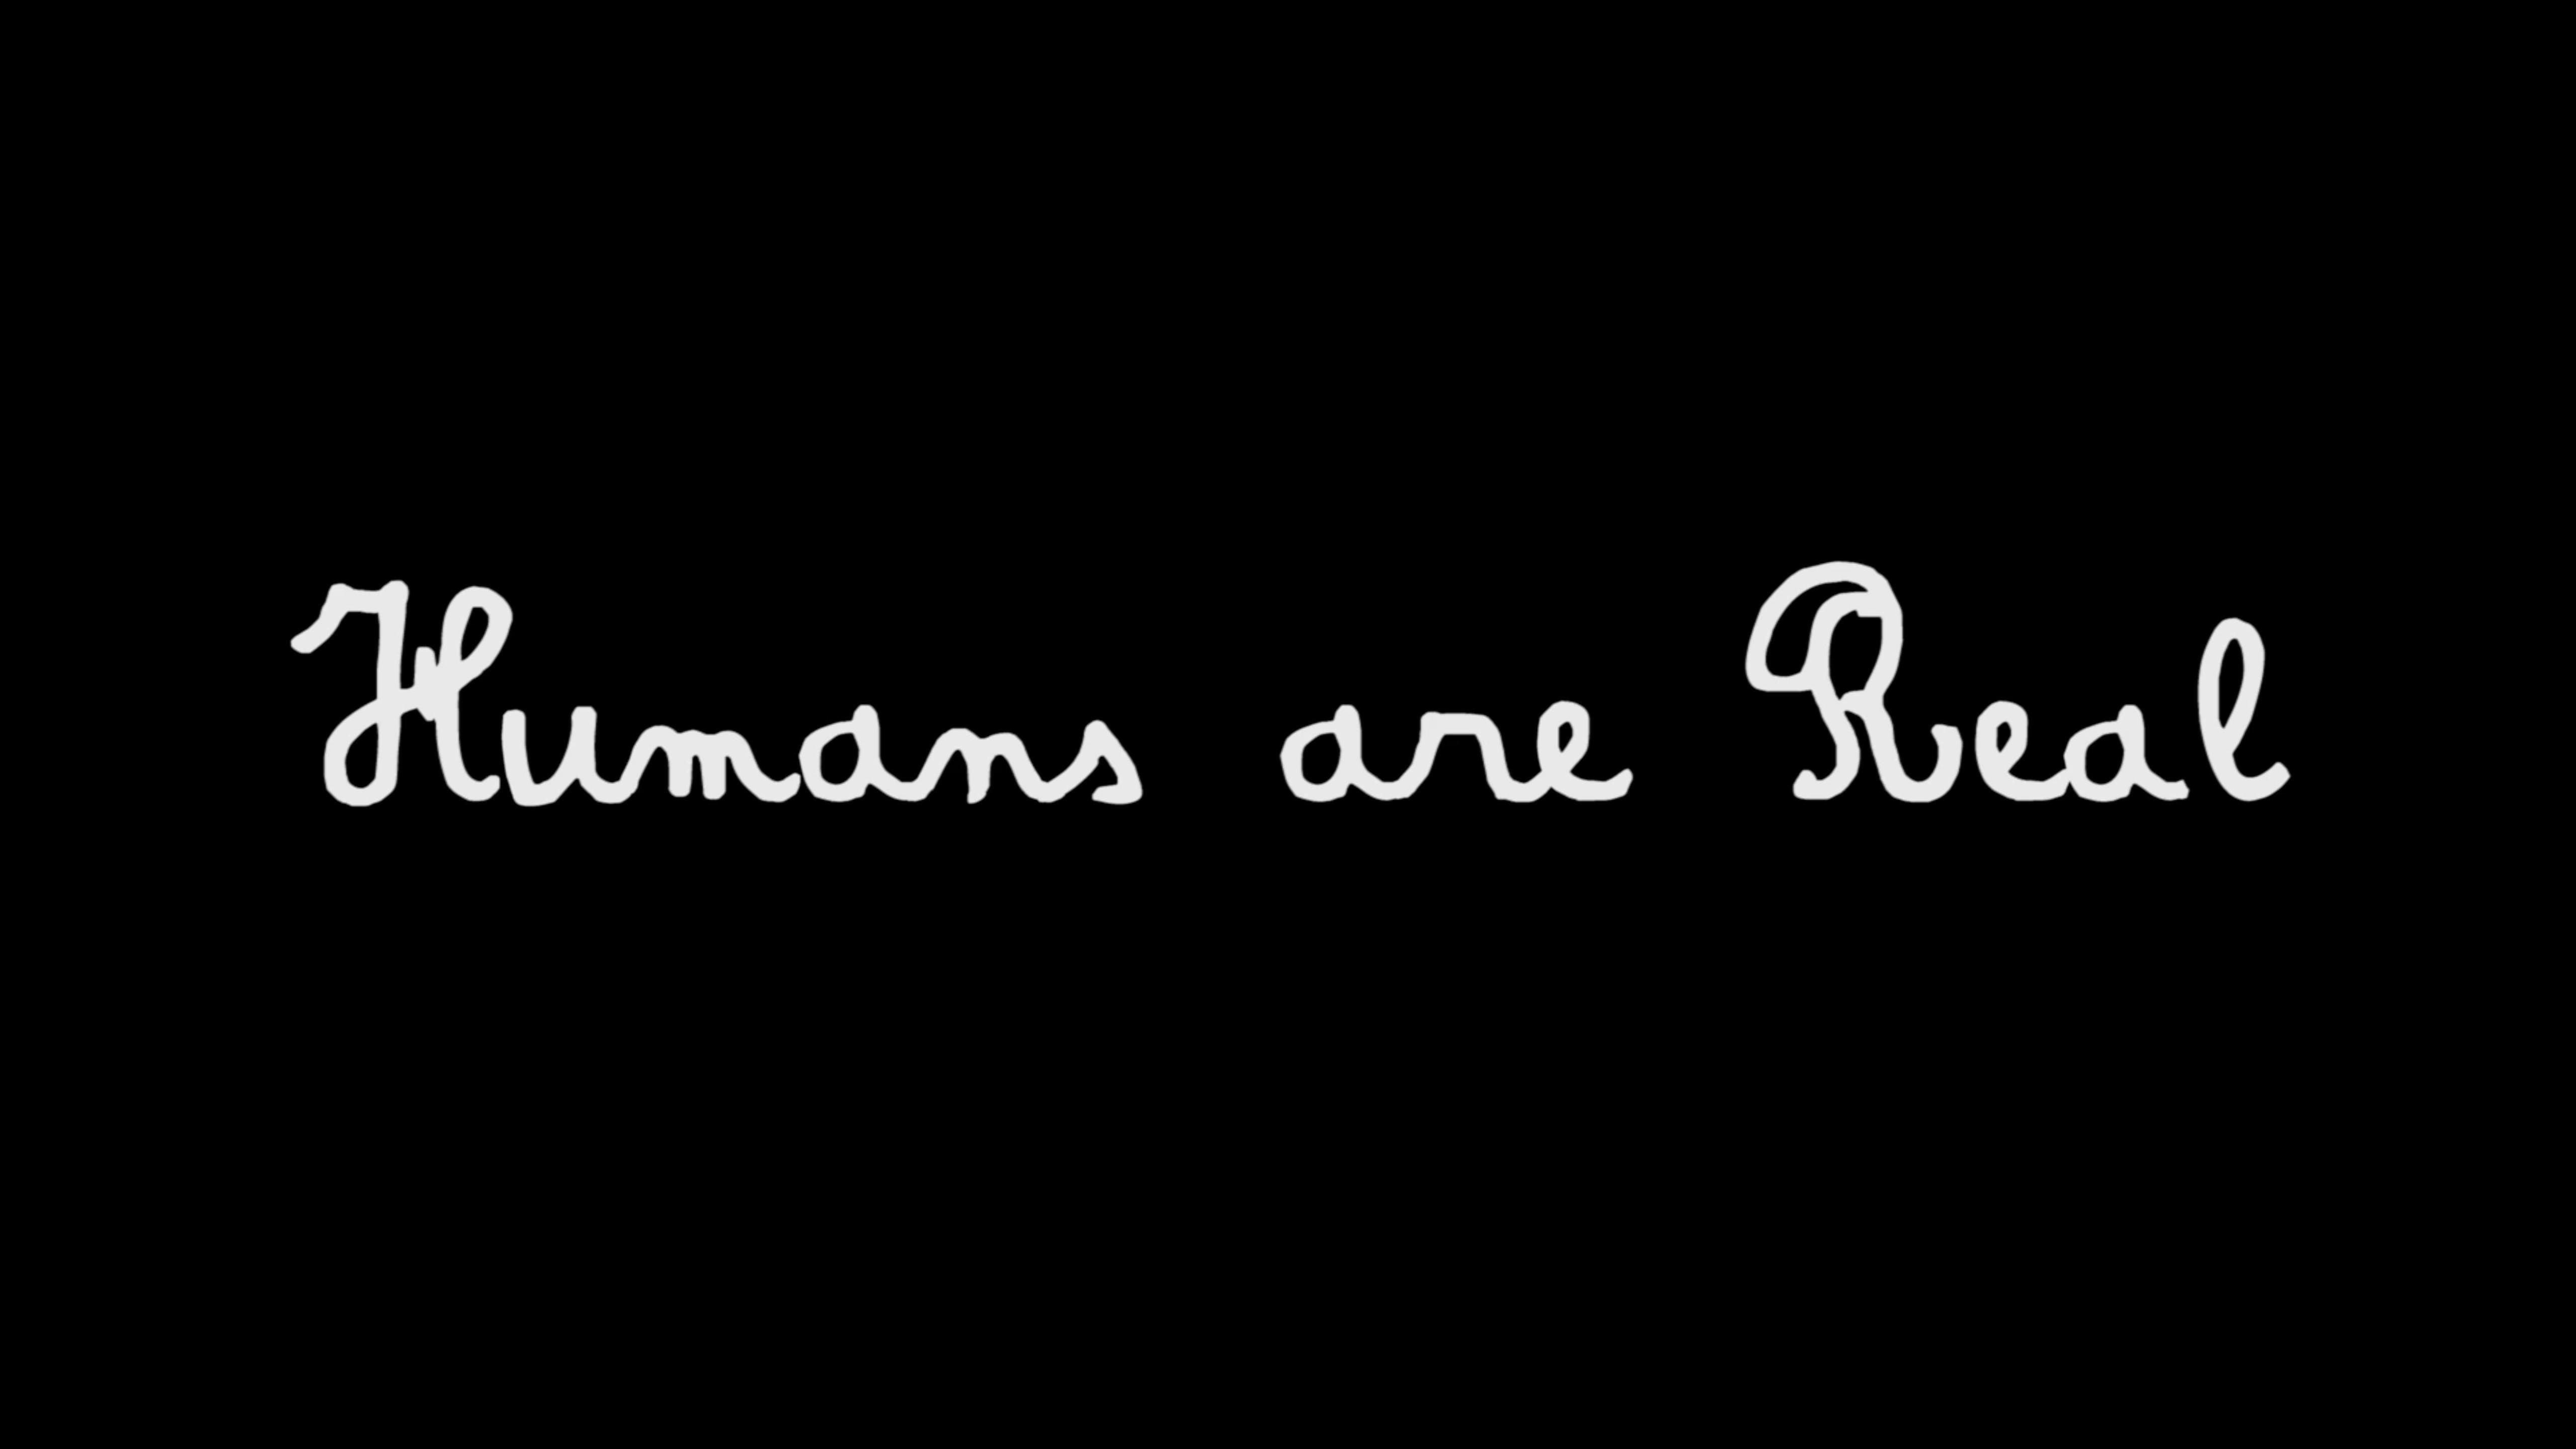 Humans Are Real